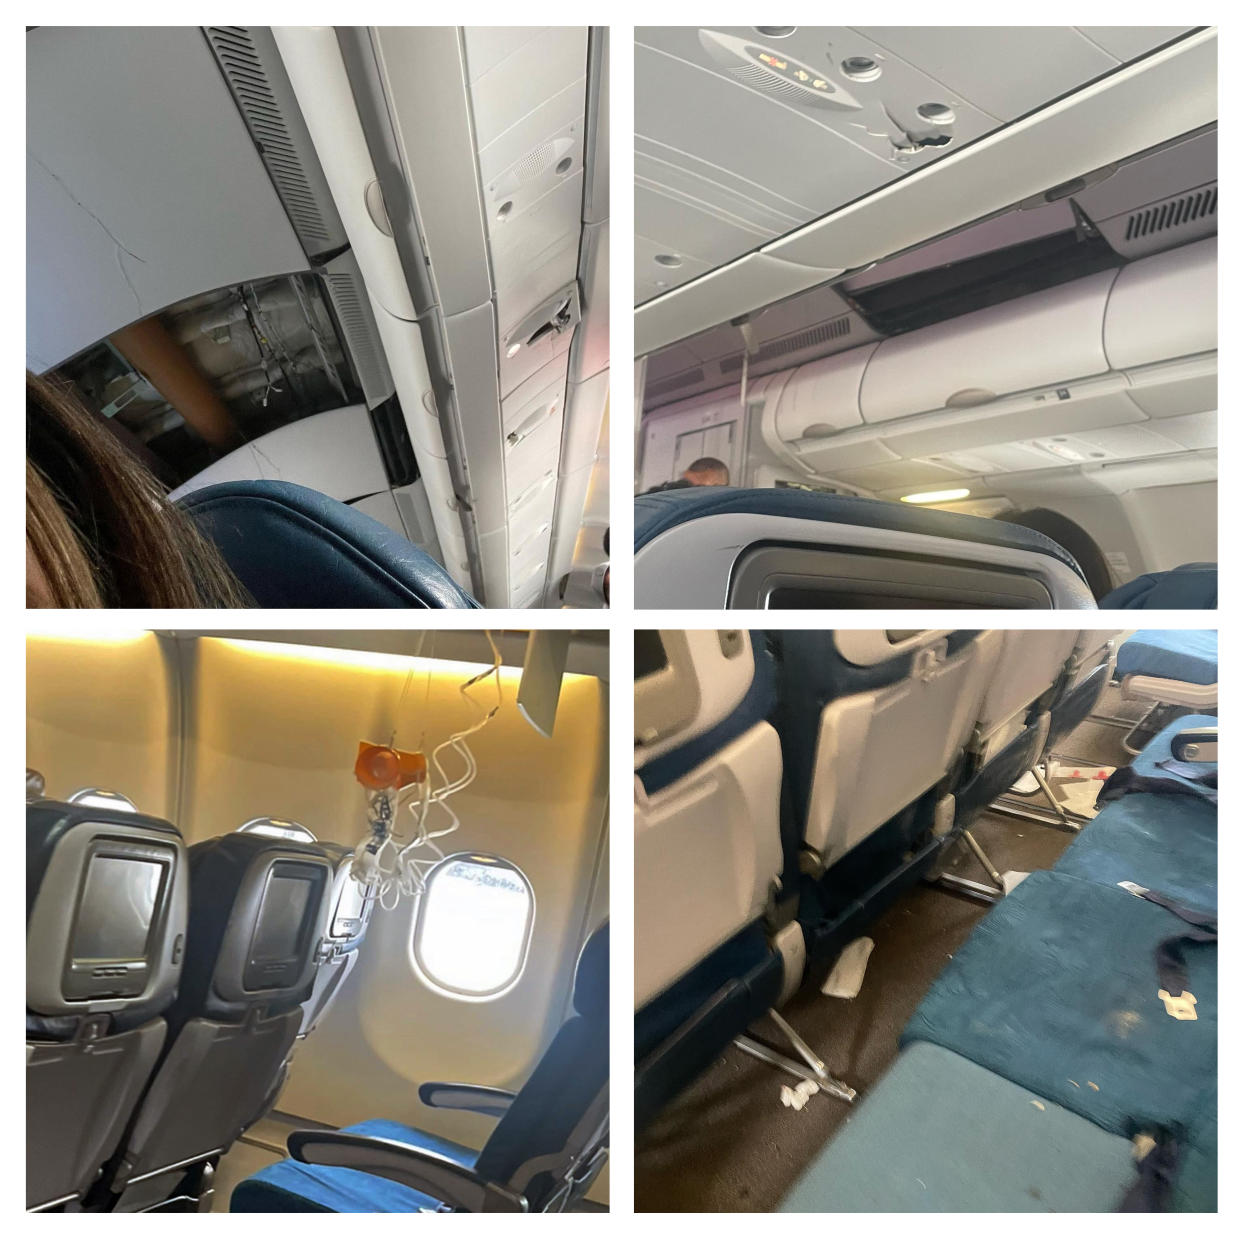 Interior photos of the plane show ceiling missing panels, wires falling to the floor, and debris on the ground in front of a passenger seat.